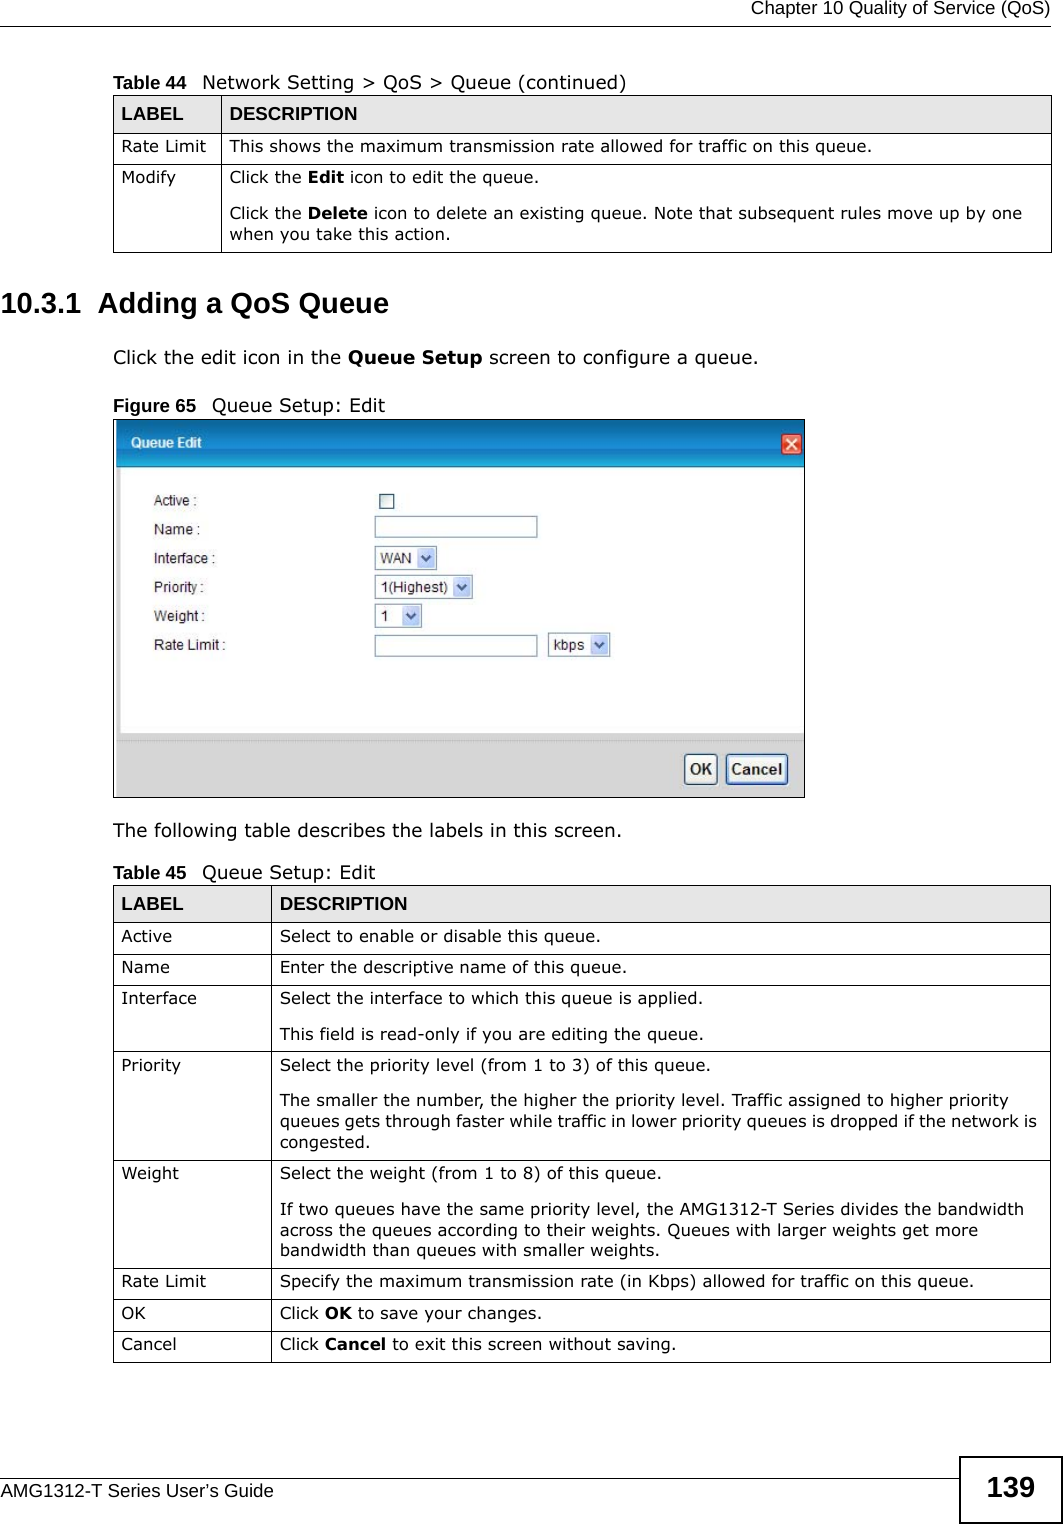  Chapter 10 Quality of Service (QoS)AMG1312-T Series User’s Guide 13910.3.1  Adding a QoS Queue Click the edit icon in the Queue Setup screen to configure a queue. Figure 65   Queue Setup: Edit The following table describes the labels in this screen.  Rate Limit This shows the maximum transmission rate allowed for traffic on this queue.Modify Click the Edit icon to edit the queue.Click the Delete icon to delete an existing queue. Note that subsequent rules move up by one when you take this action.Table 44   Network Setting &gt; QoS &gt; Queue (continued)LABEL DESCRIPTIONTable 45   Queue Setup: EditLABEL DESCRIPTIONActive Select to enable or disable this queue.Name Enter the descriptive name of this queue.Interface Select the interface to which this queue is applied.This field is read-only if you are editing the queue.Priority Select the priority level (from 1 to 3) of this queue.The smaller the number, the higher the priority level. Traffic assigned to higher priority queues gets through faster while traffic in lower priority queues is dropped if the network is congested.Weight Select the weight (from 1 to 8) of this queue. If two queues have the same priority level, the AMG1312-T Series divides the bandwidth across the queues according to their weights. Queues with larger weights get more bandwidth than queues with smaller weights.Rate Limit Specify the maximum transmission rate (in Kbps) allowed for traffic on this queue.OK Click OK to save your changes.Cancel Click Cancel to exit this screen without saving.